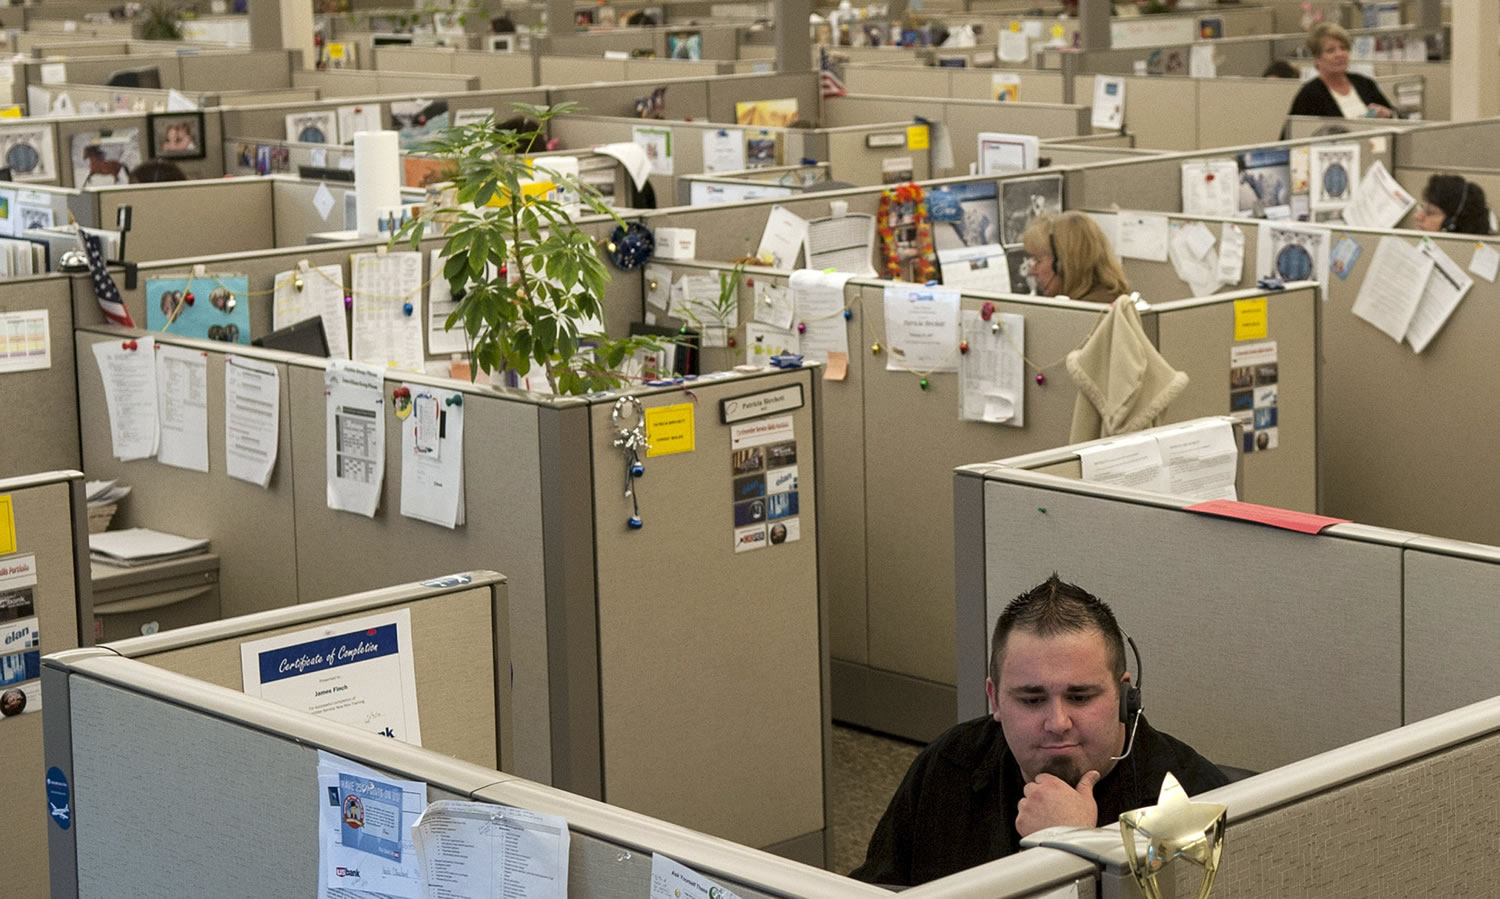 James Finch, service adviser for the US Bank Service Center, takes a call at the facility in Coeur d'Alene, Idaho.